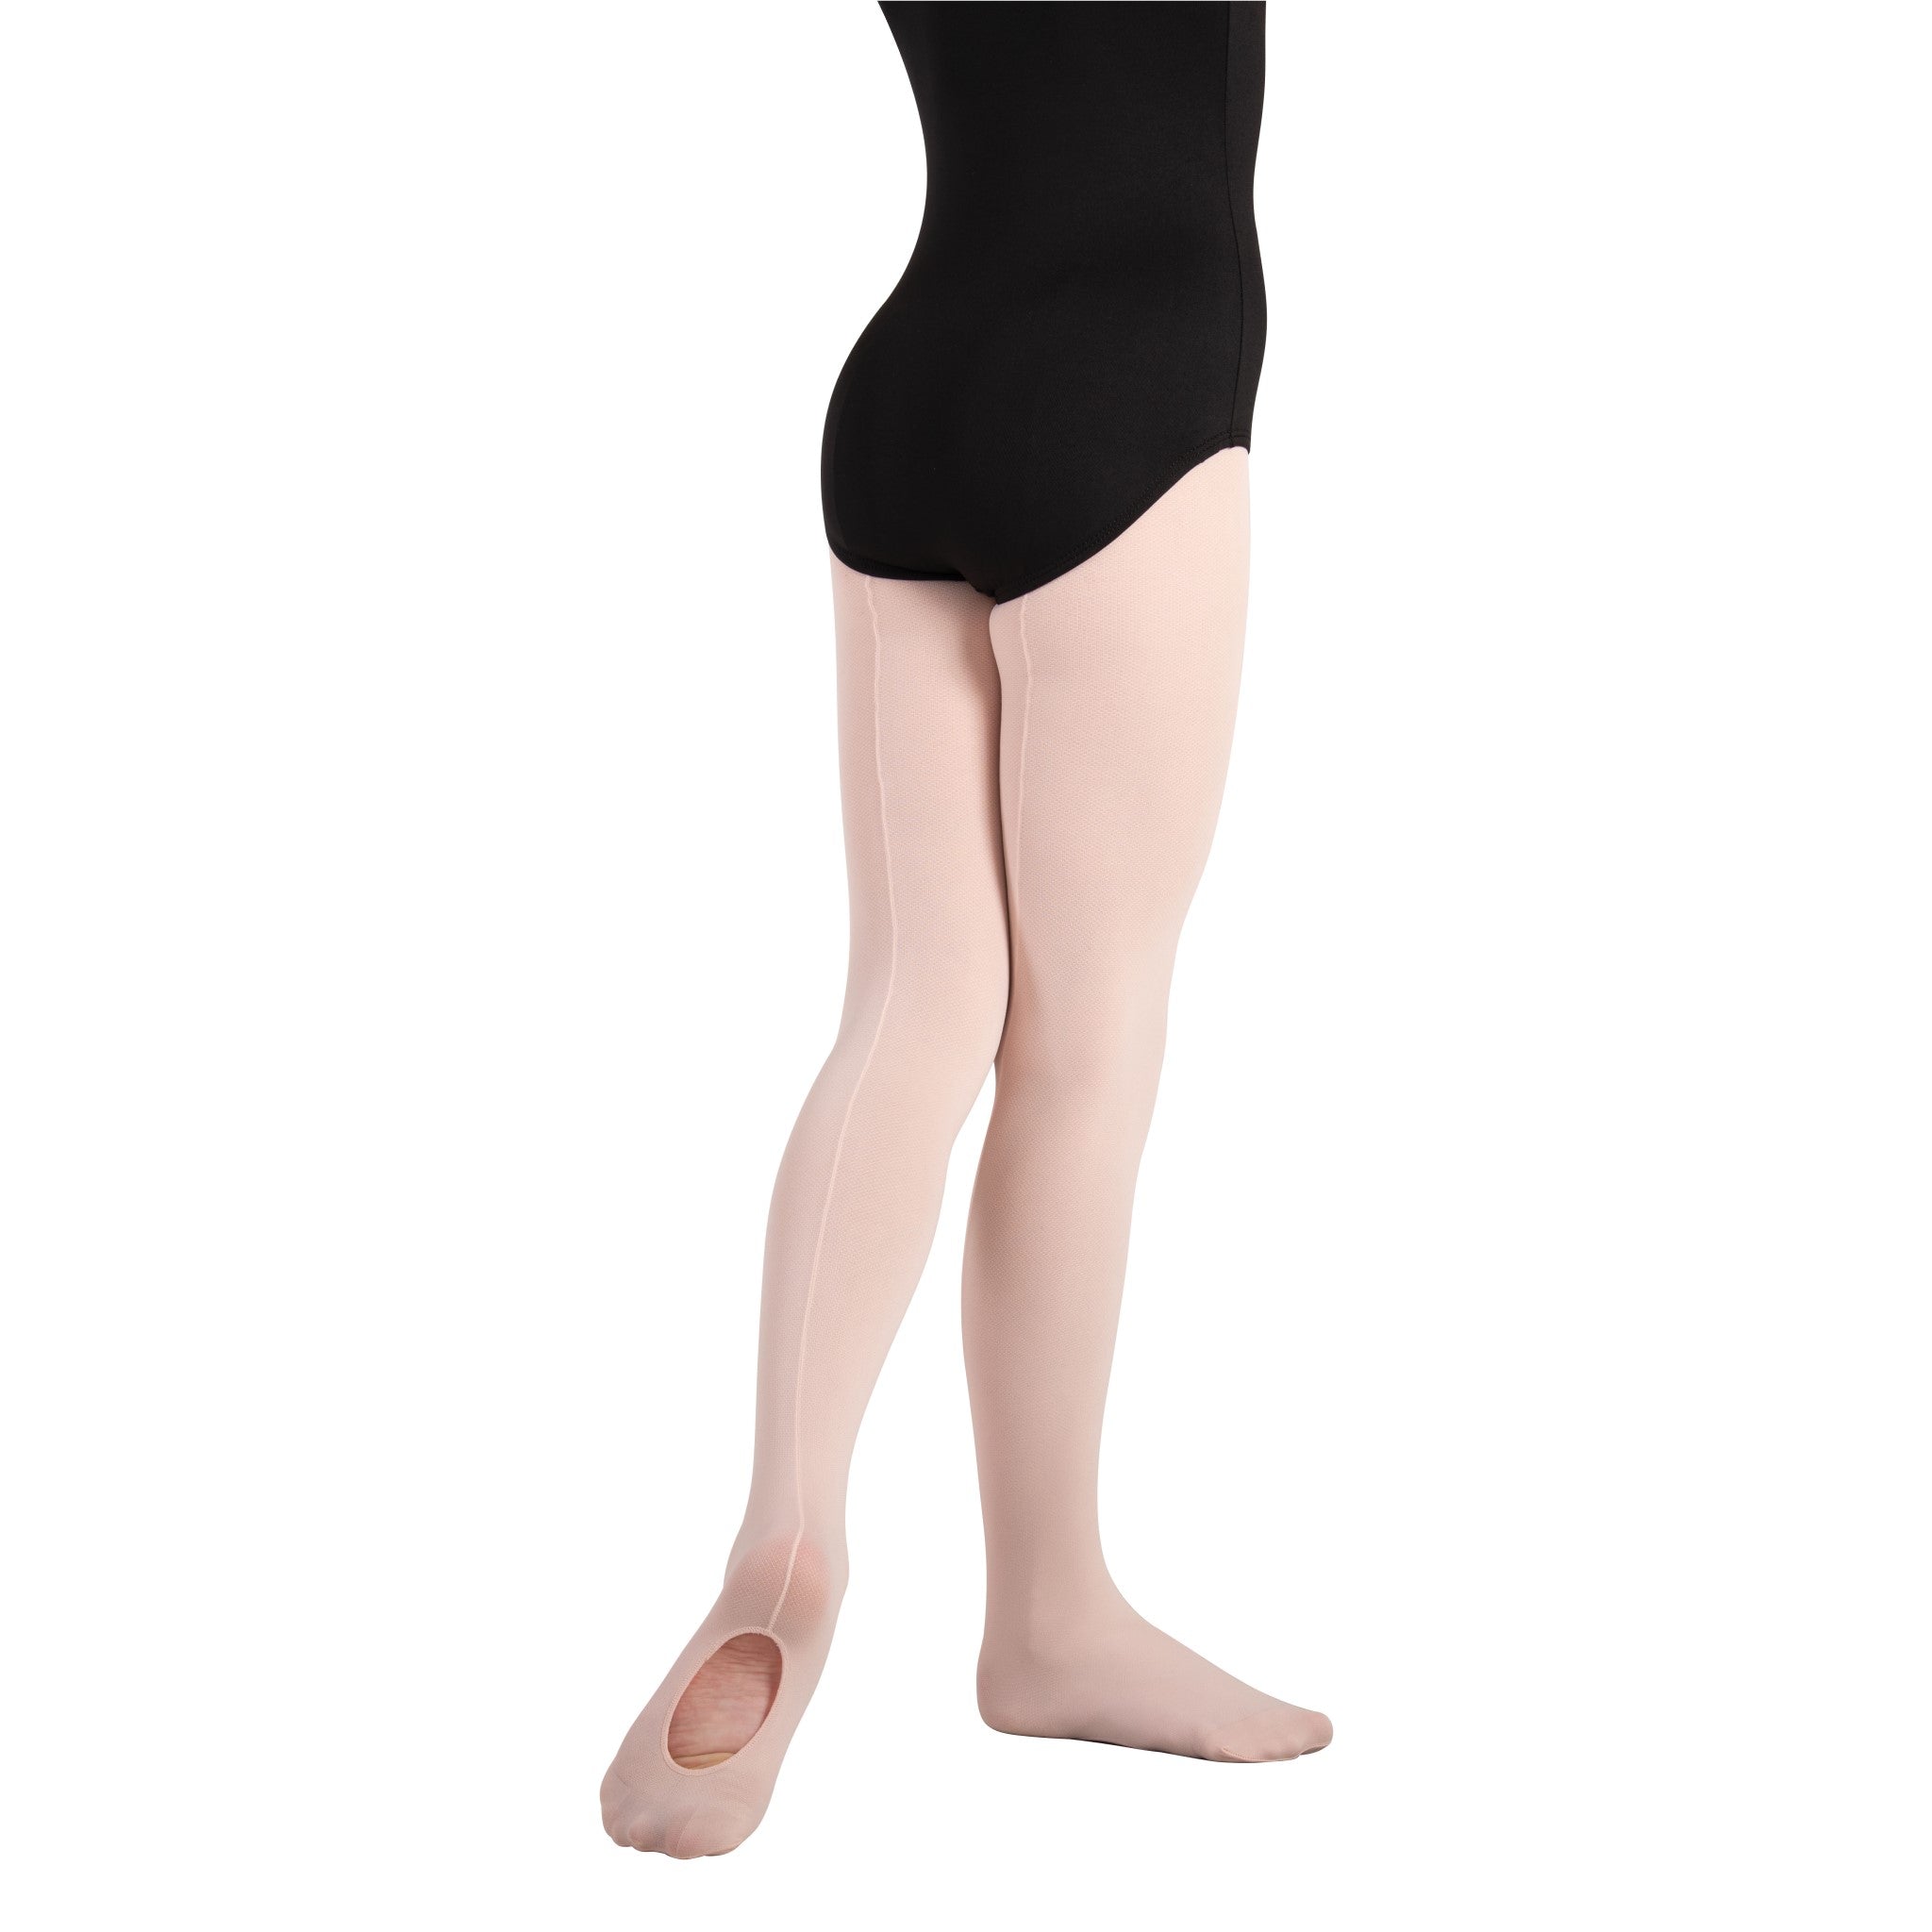 C45 Backseam Mesh Girls Convertible Dance Tights by Body Wrappers